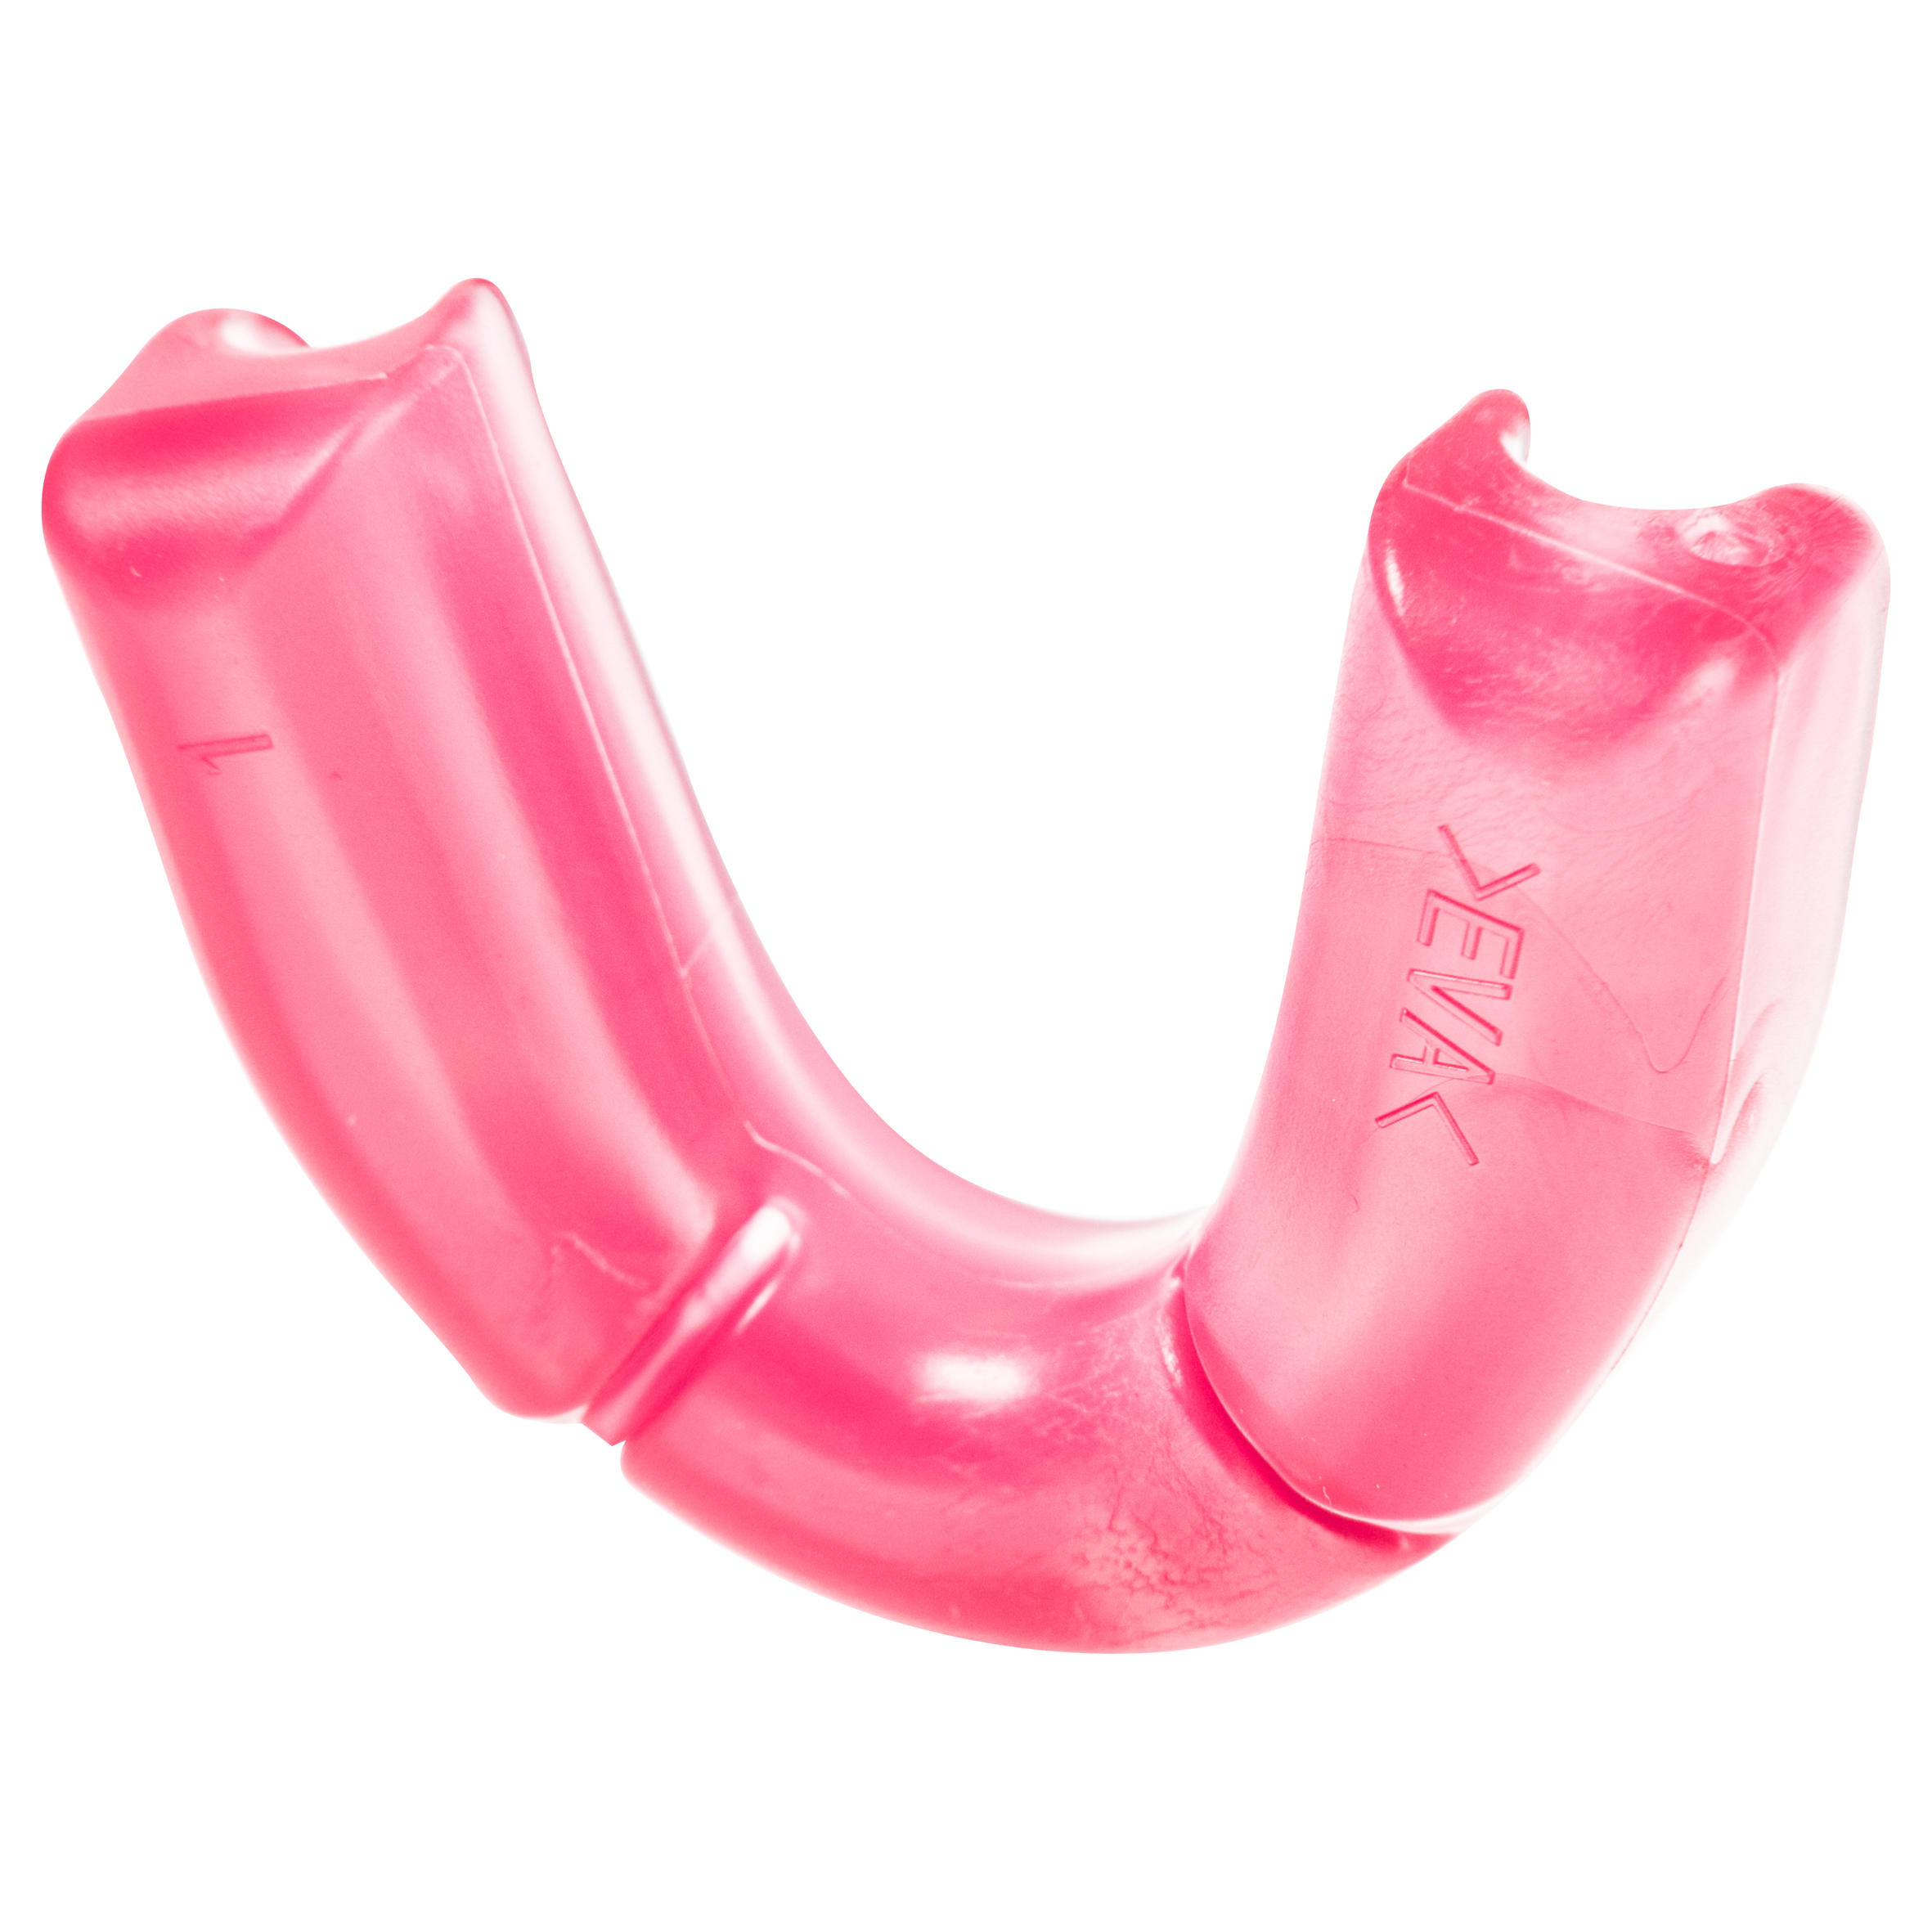 Kids' Low Intensity Field Hockey Mouthguard Size Small FH100 - Pink 6/16